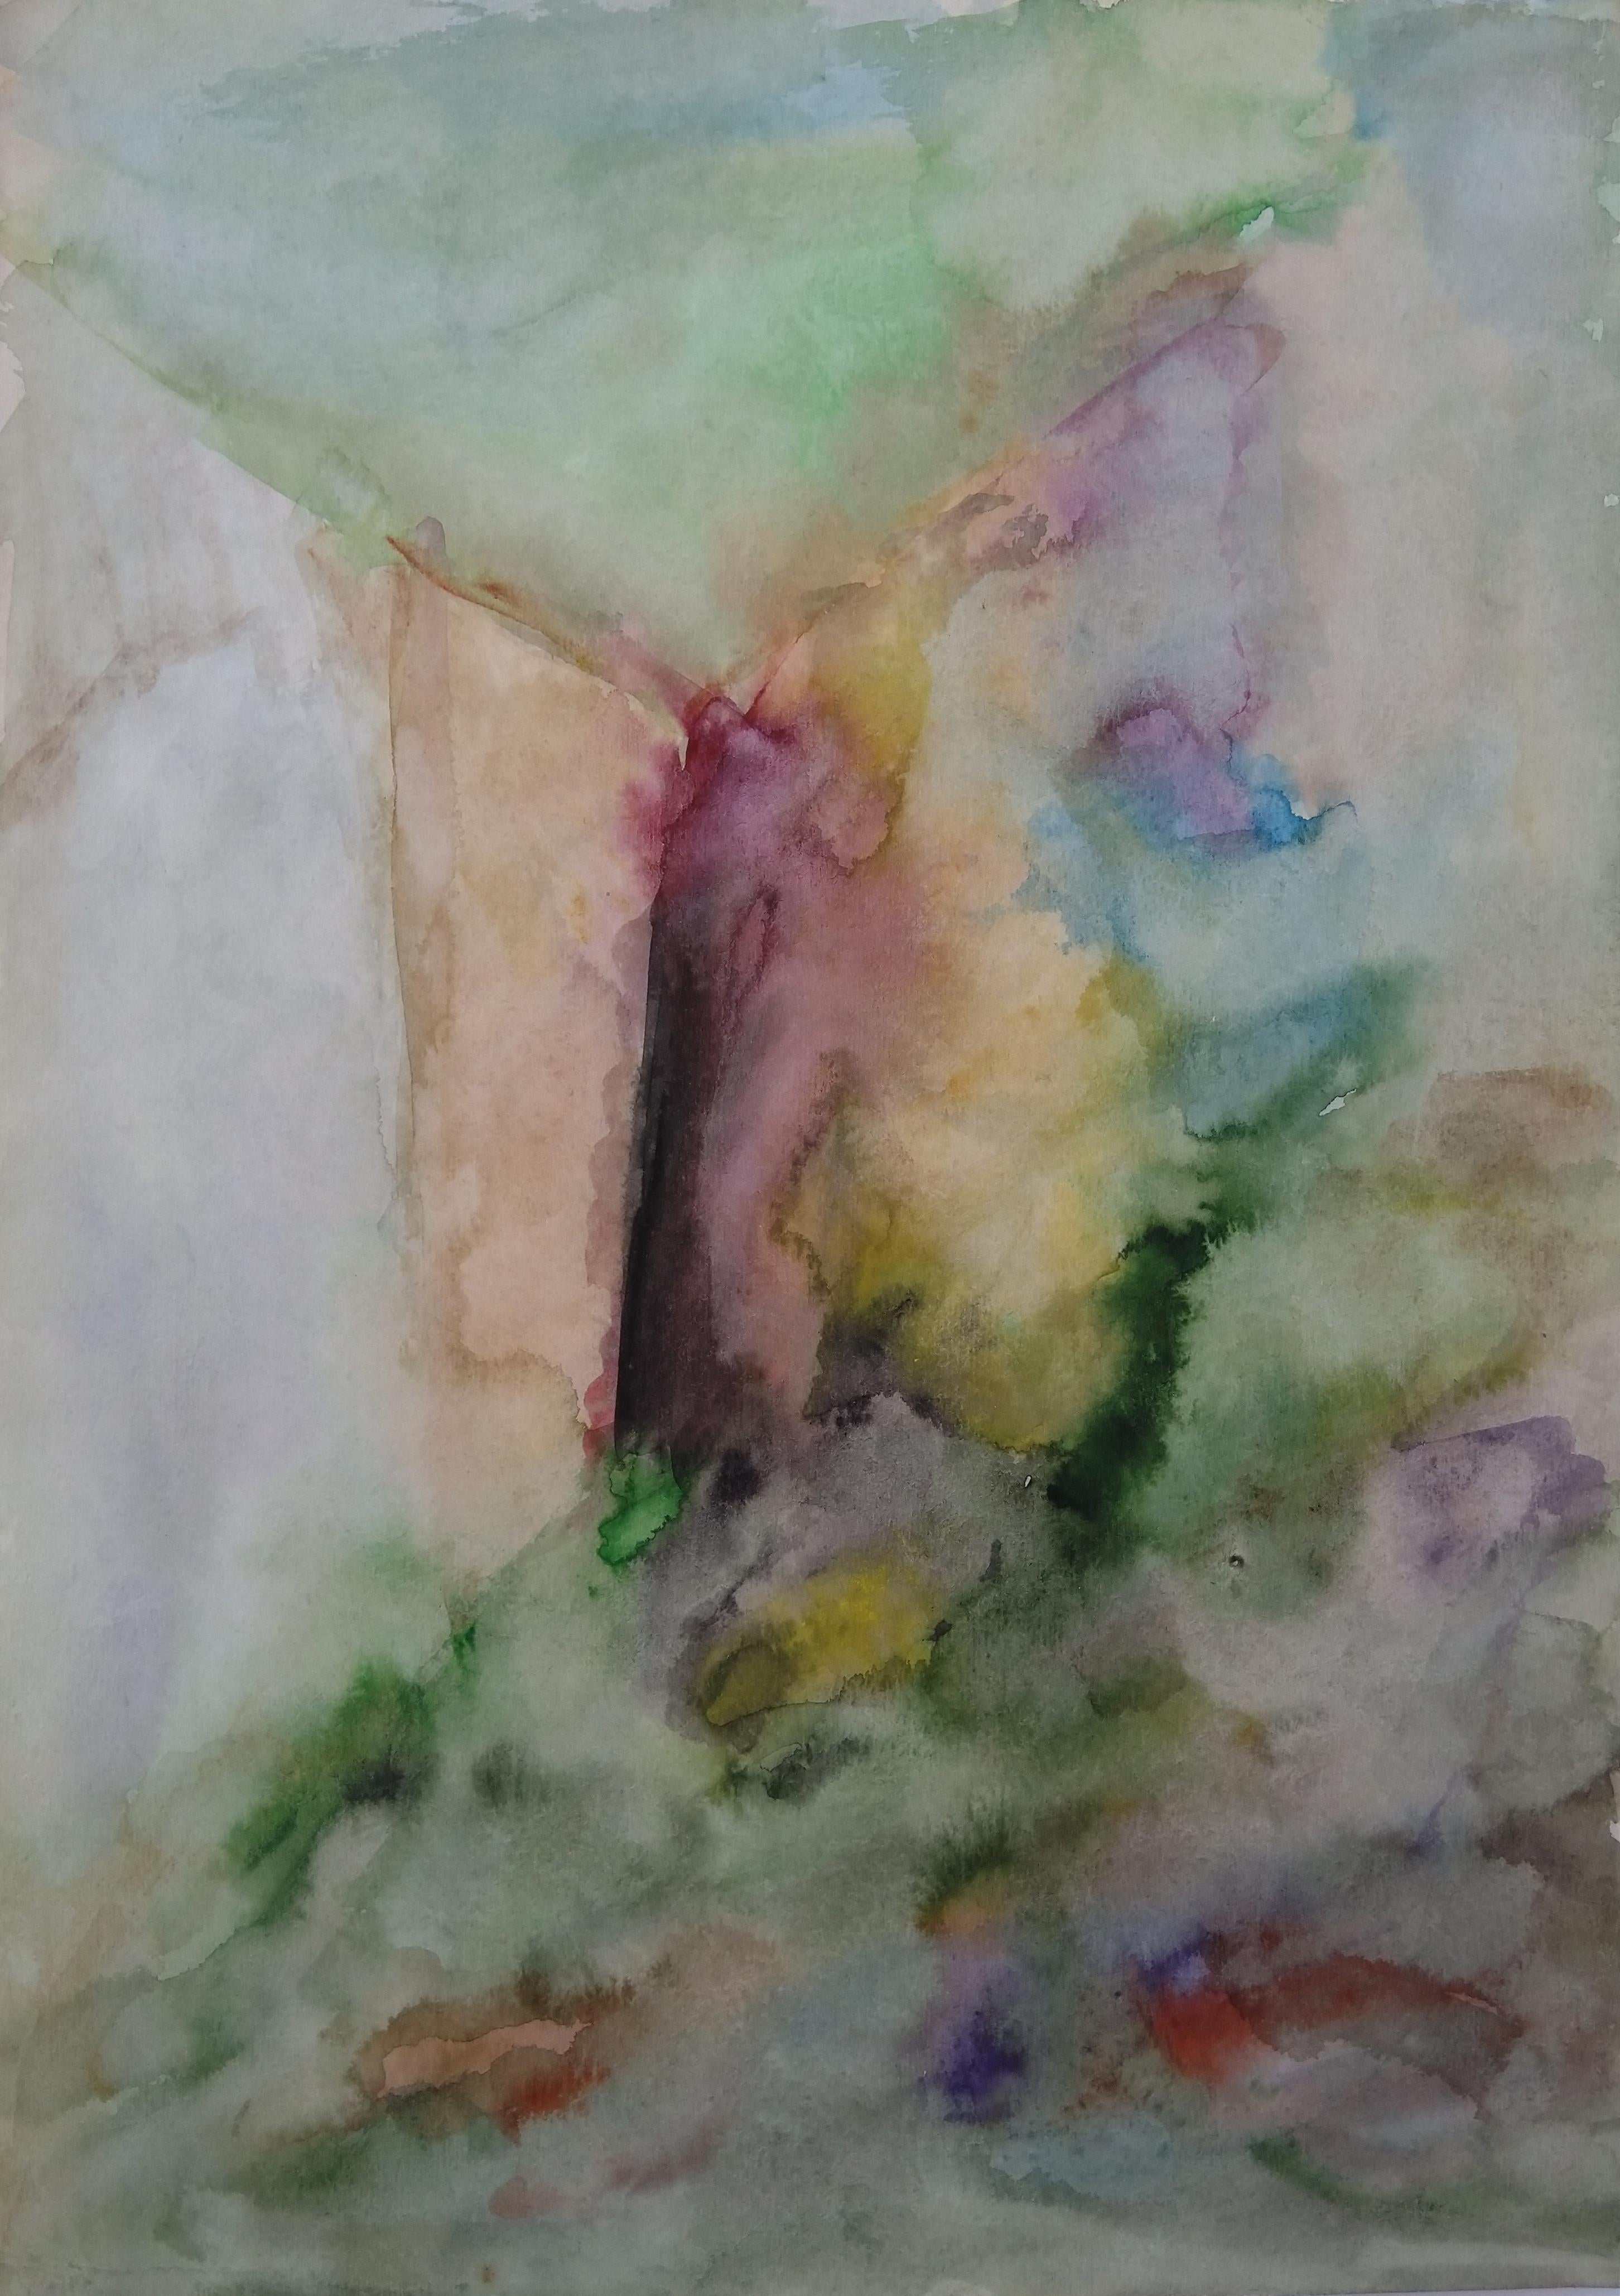 Watercolor on paper, Framed 54 x 44 x 2 cm